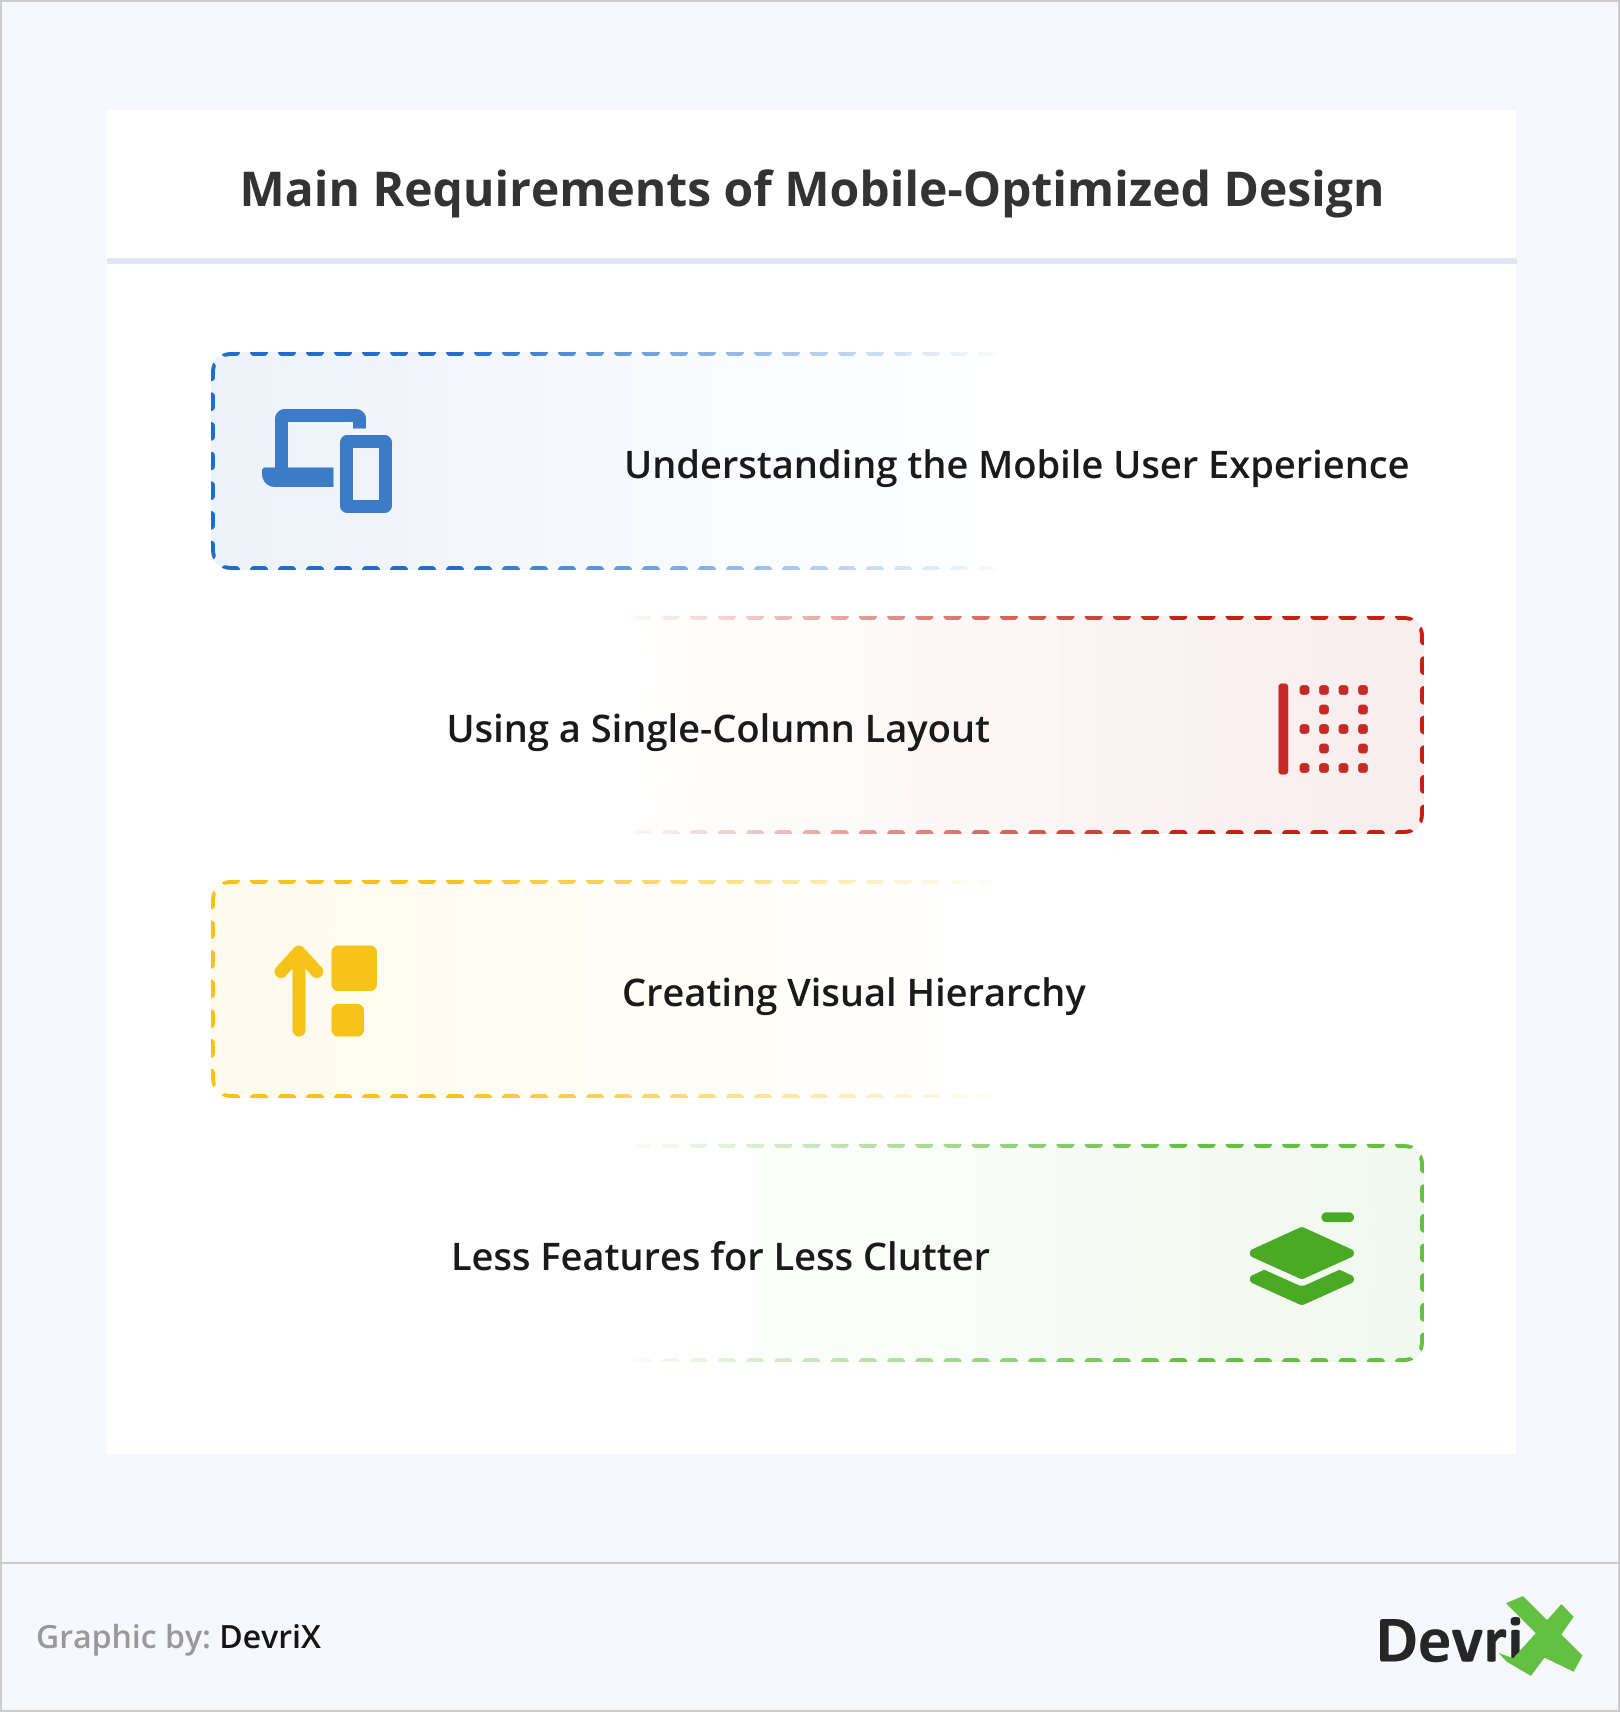 Main Requirements of Mobile-Optimized Design